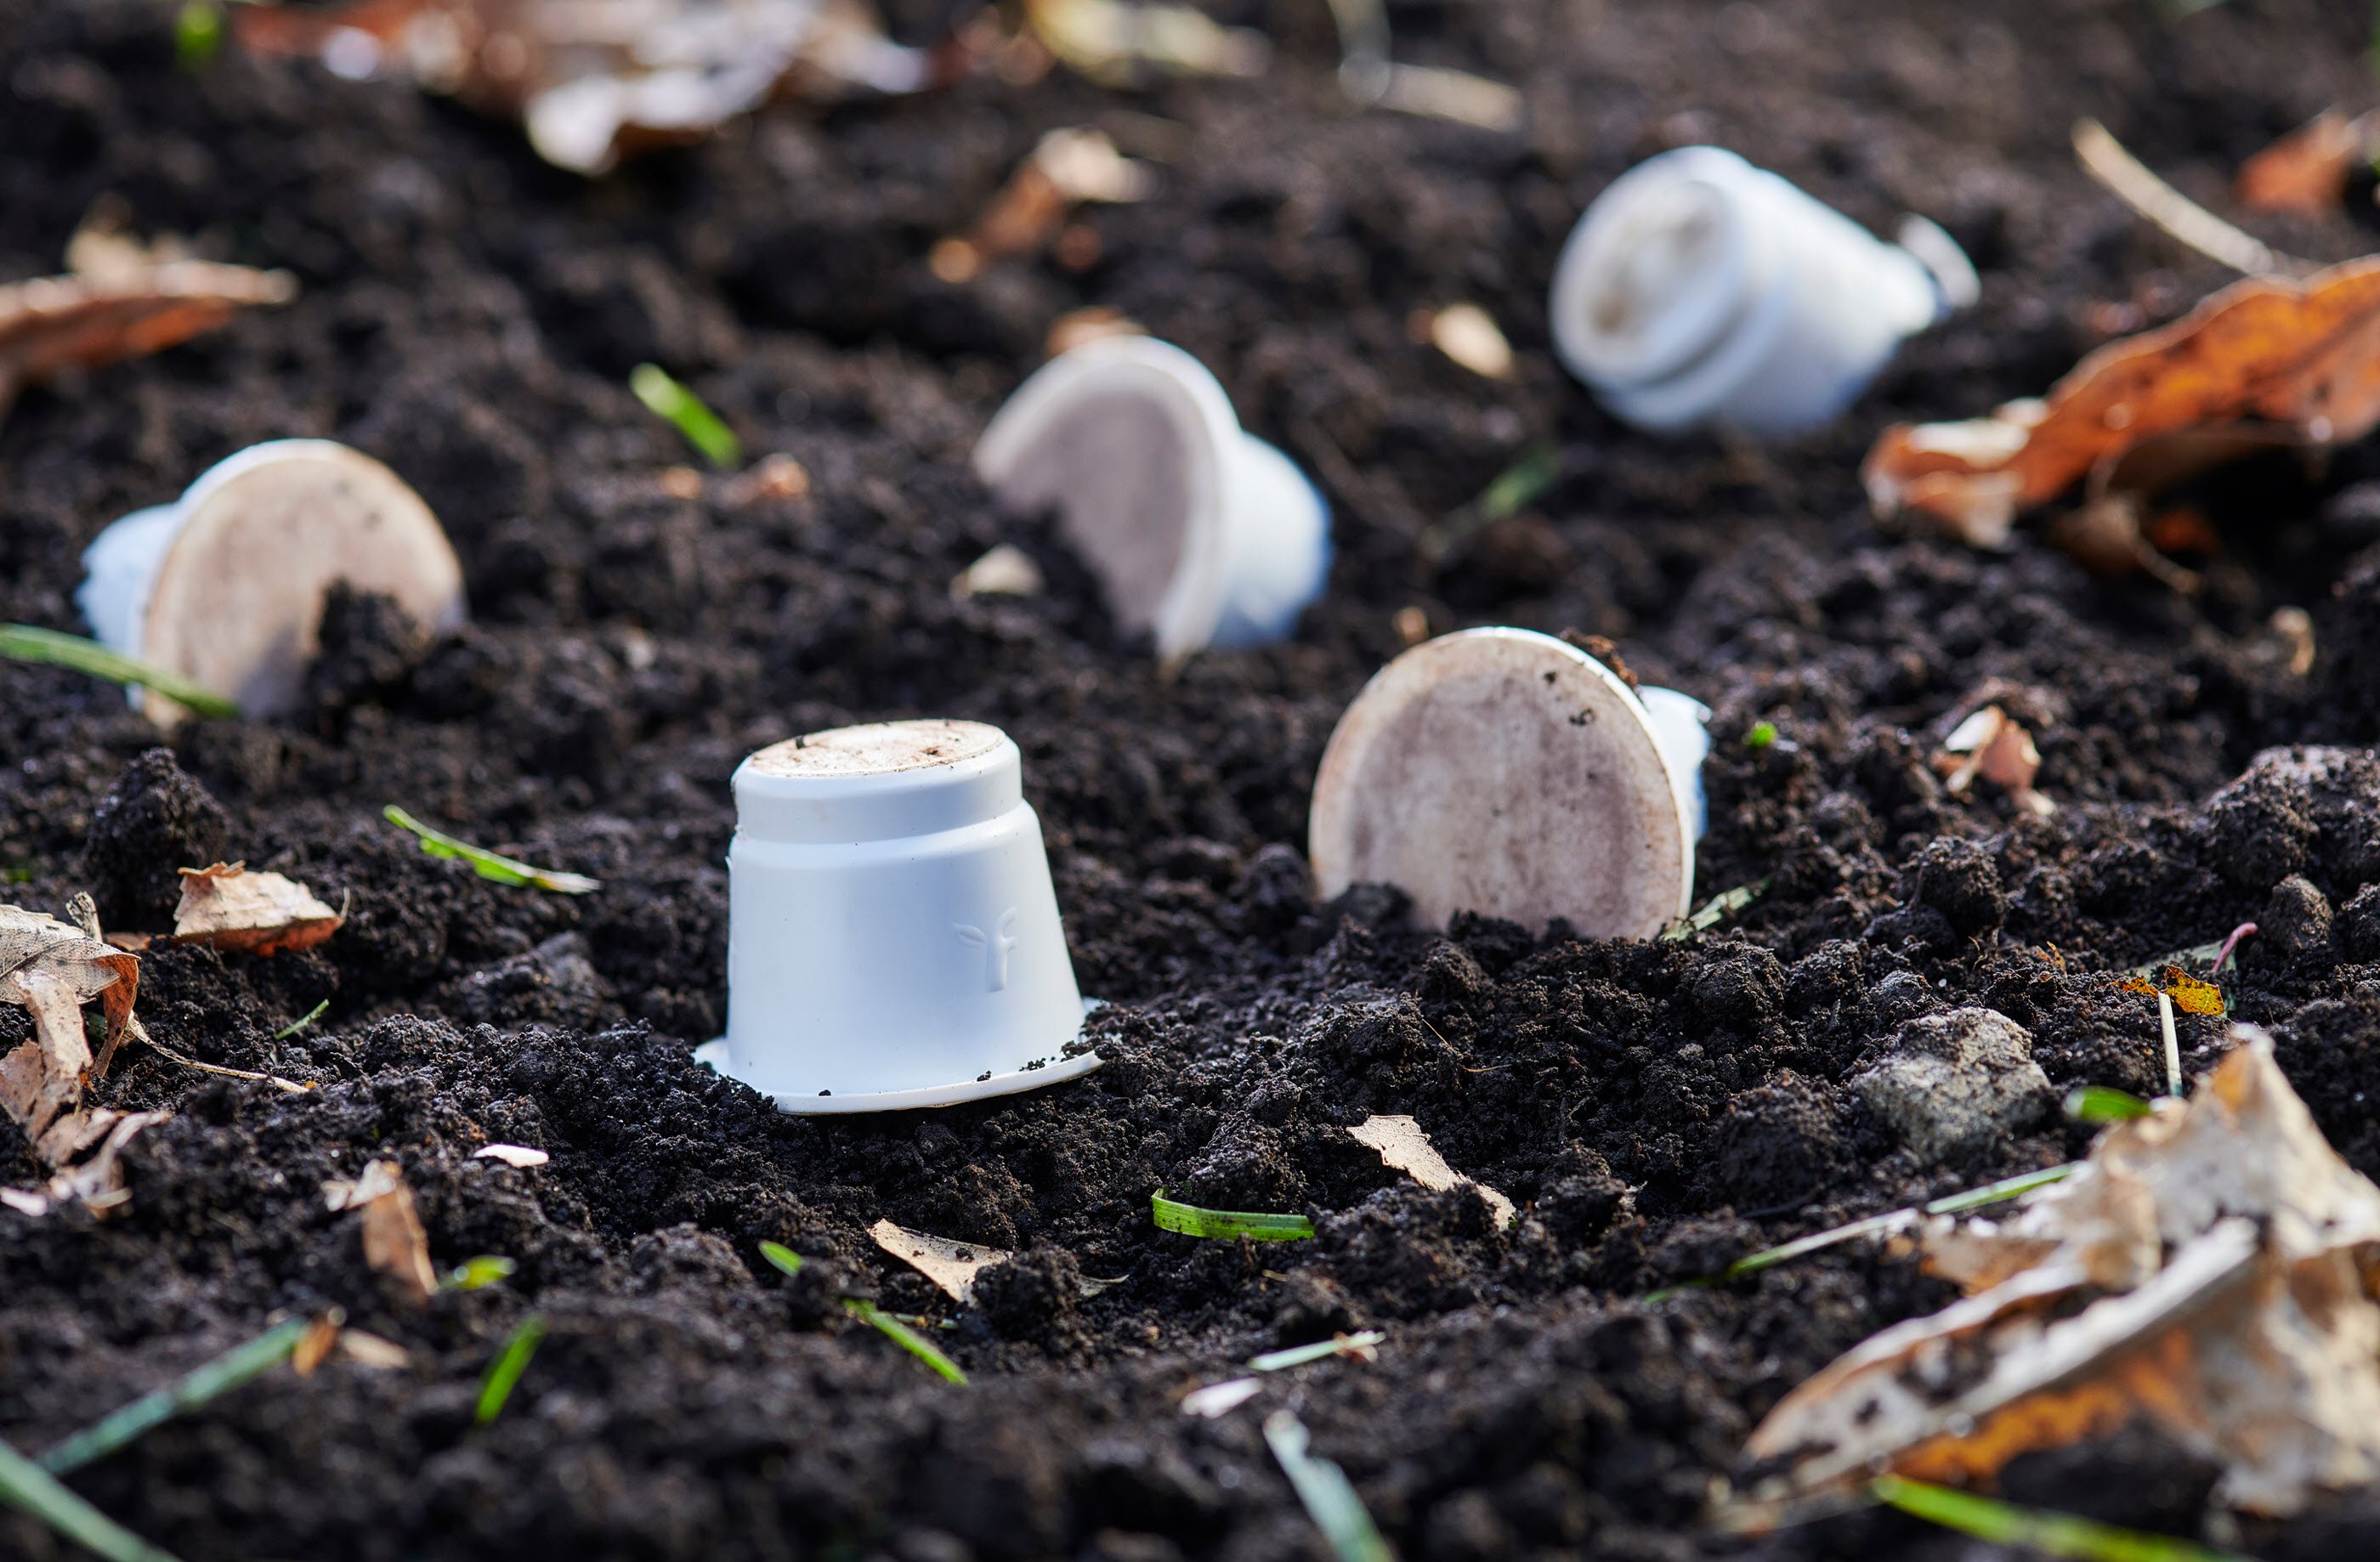 Pods Capsules K-Cups Sustainability Environment Composting Recycle - Study Research